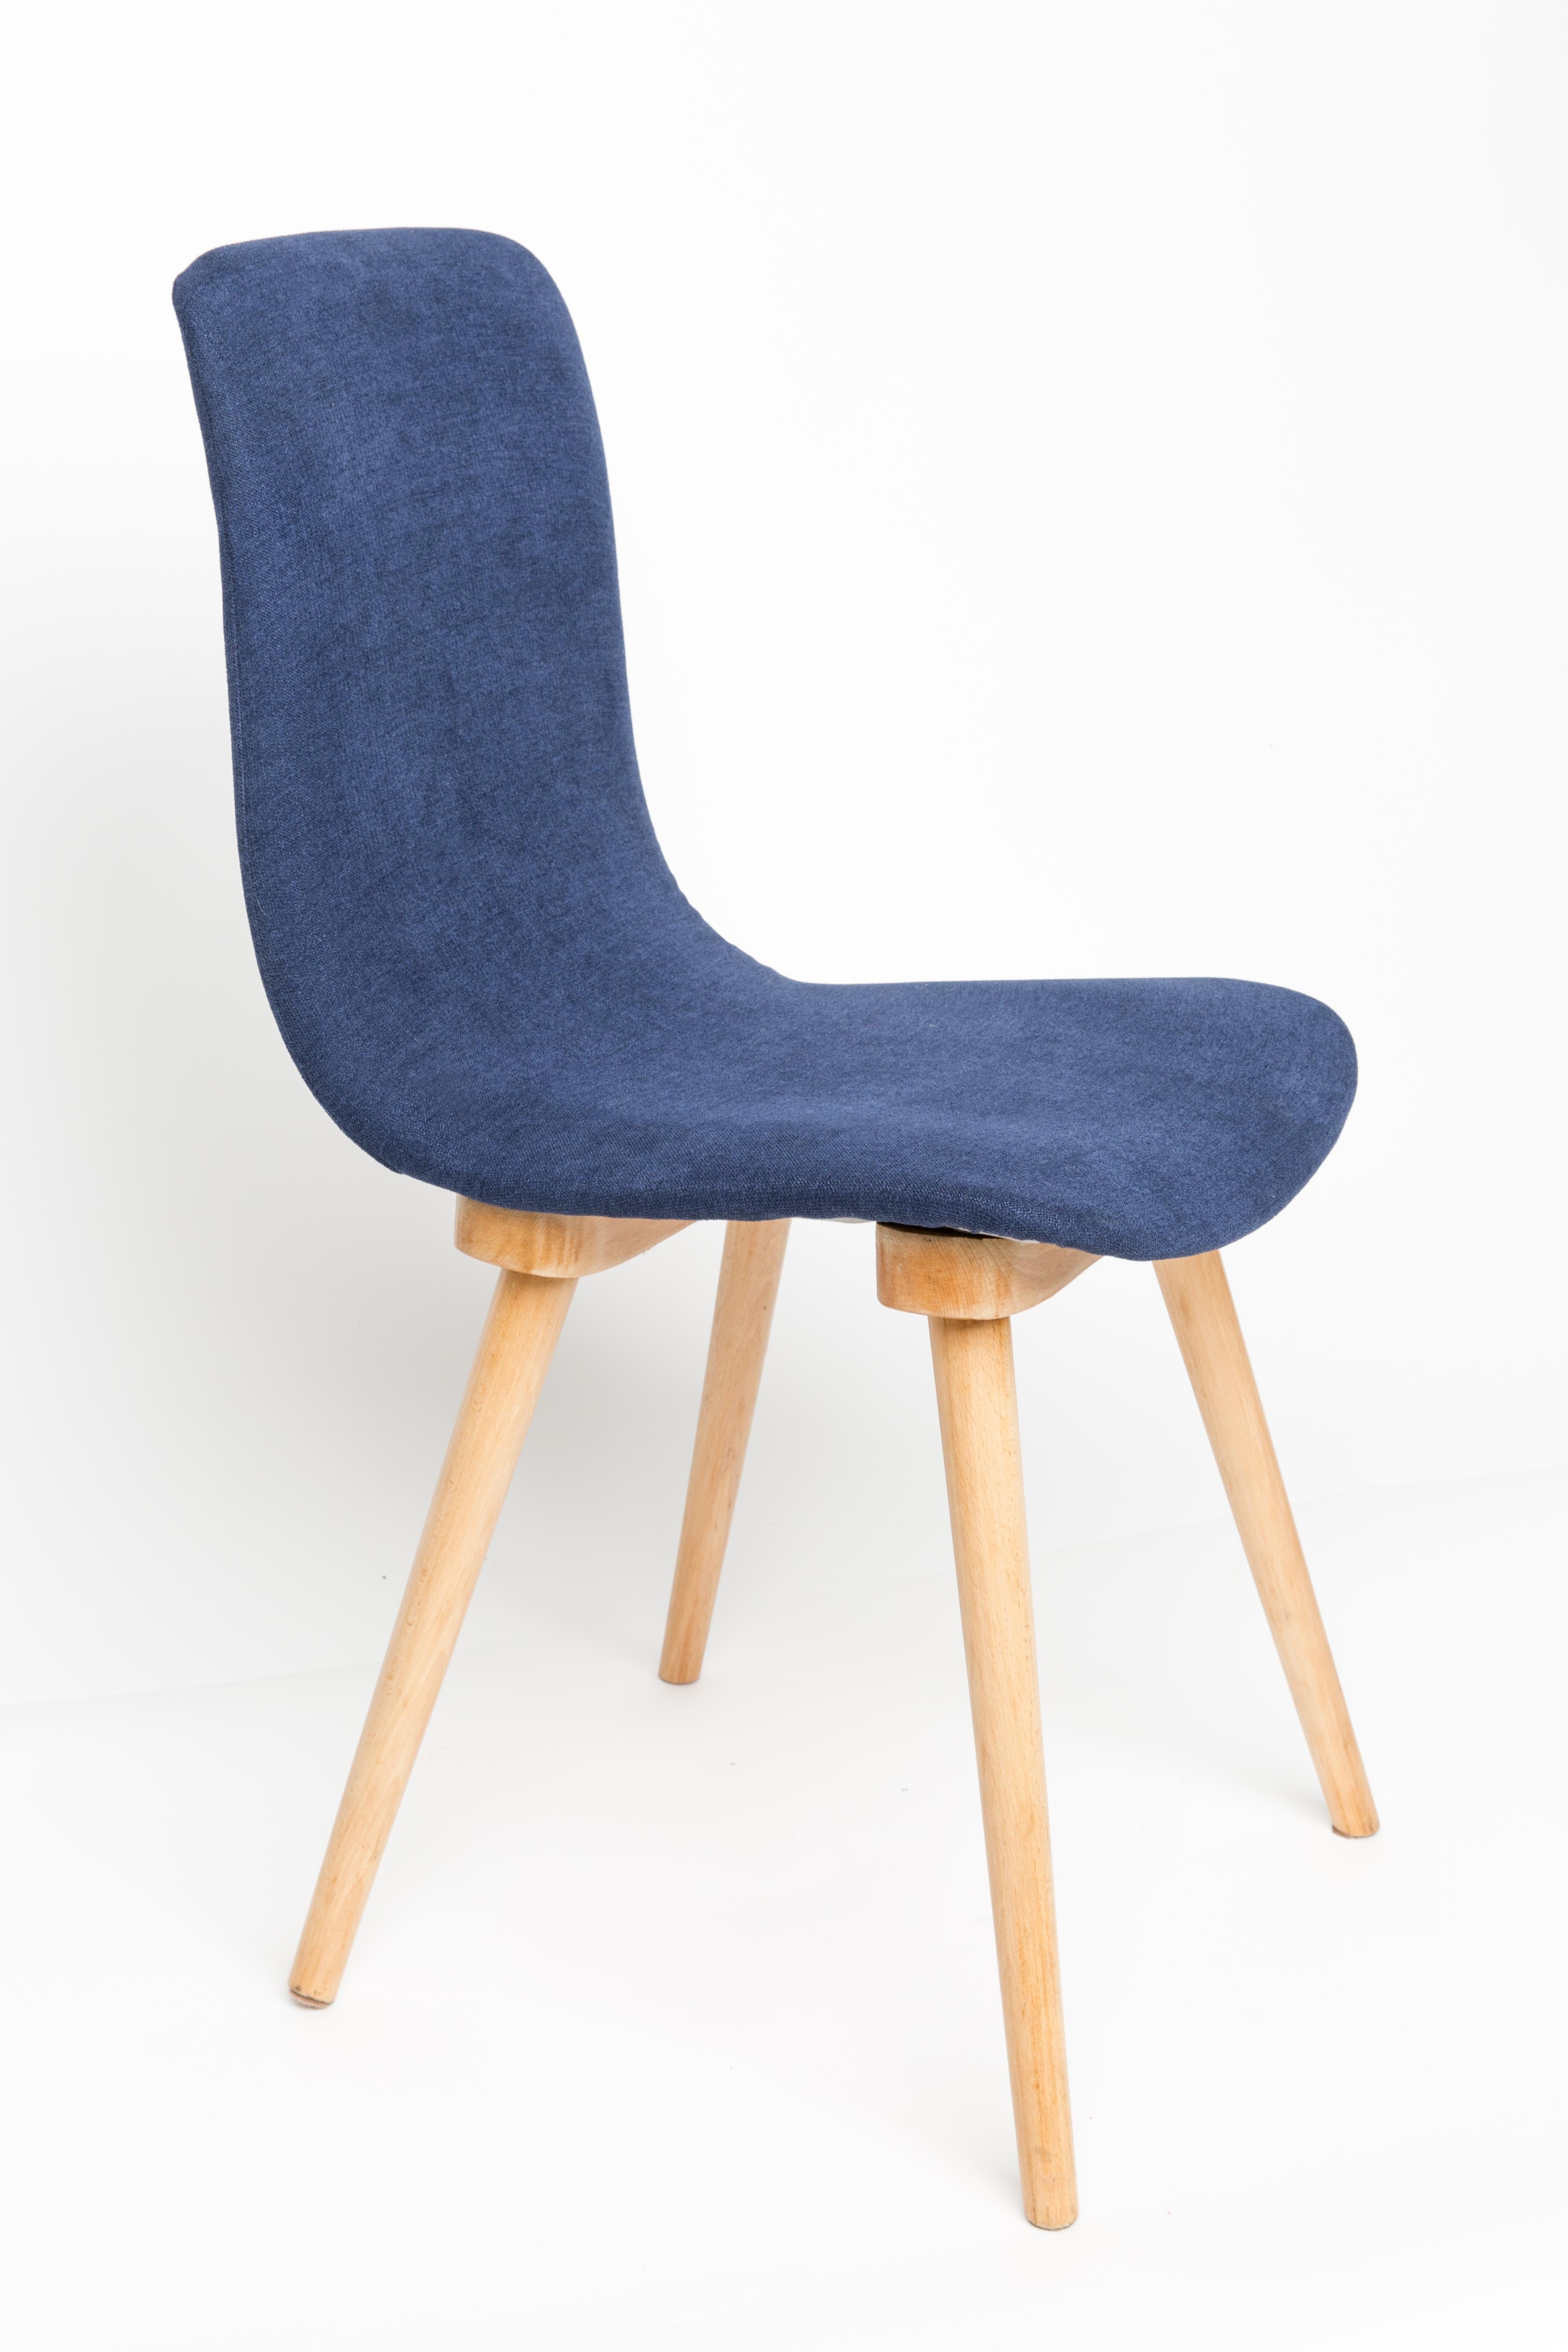 Comfortable chair A6150 produced in the late 1960s by the Furniture Factory 